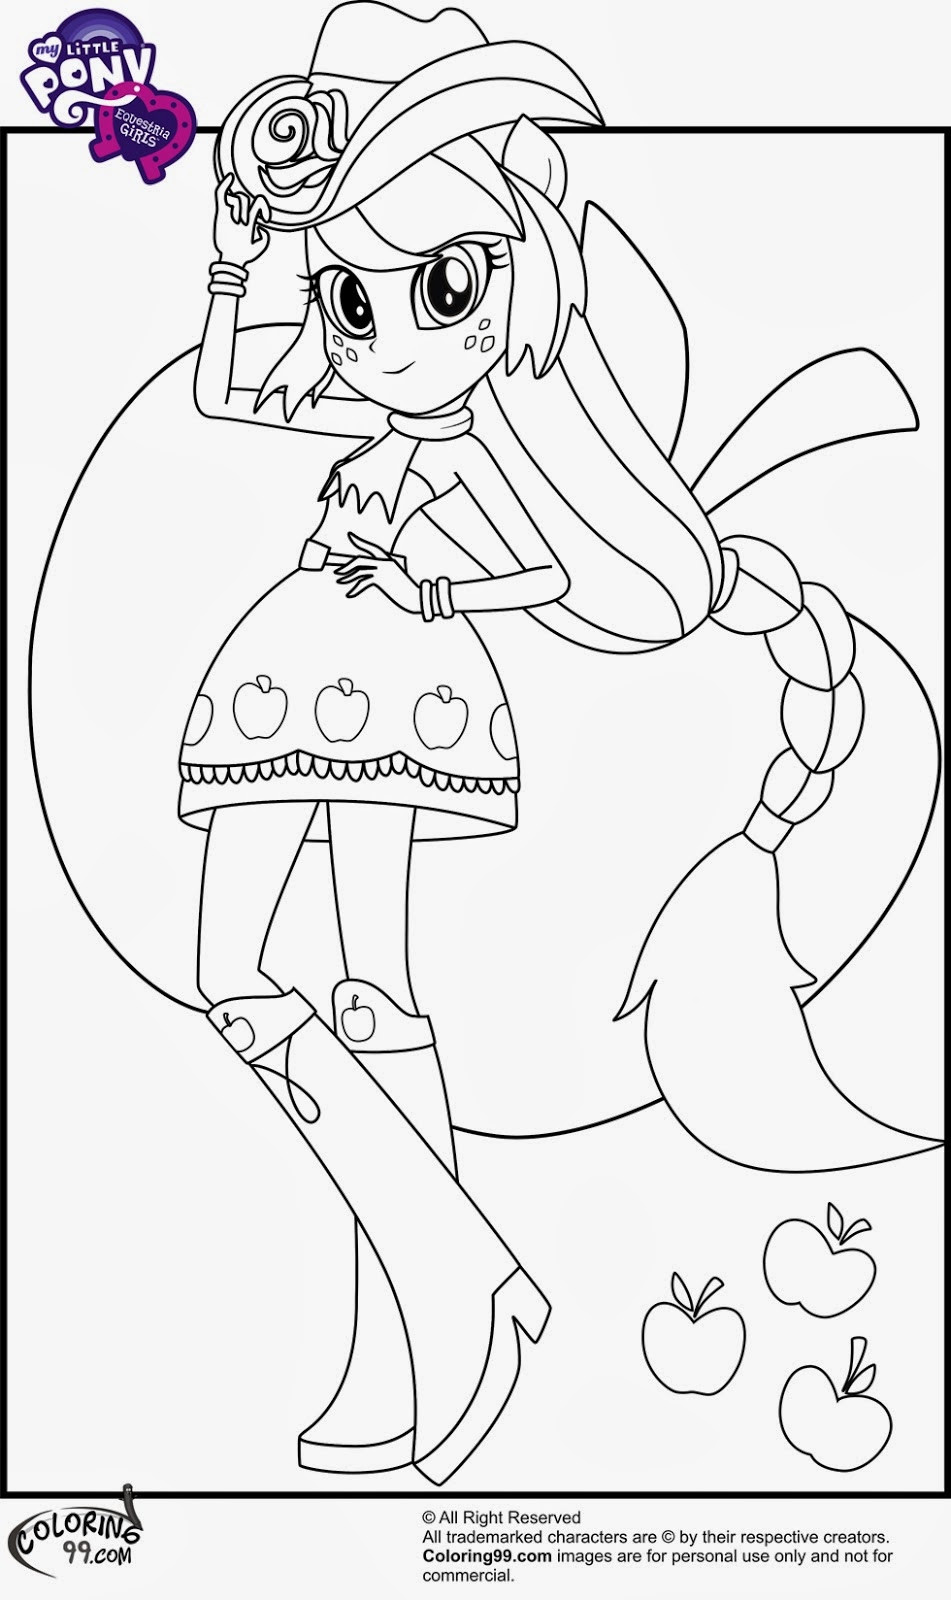 Coloring Book Pages Girls
 My Little Pony Equestria Girls Blog ¡¡Imágenes para